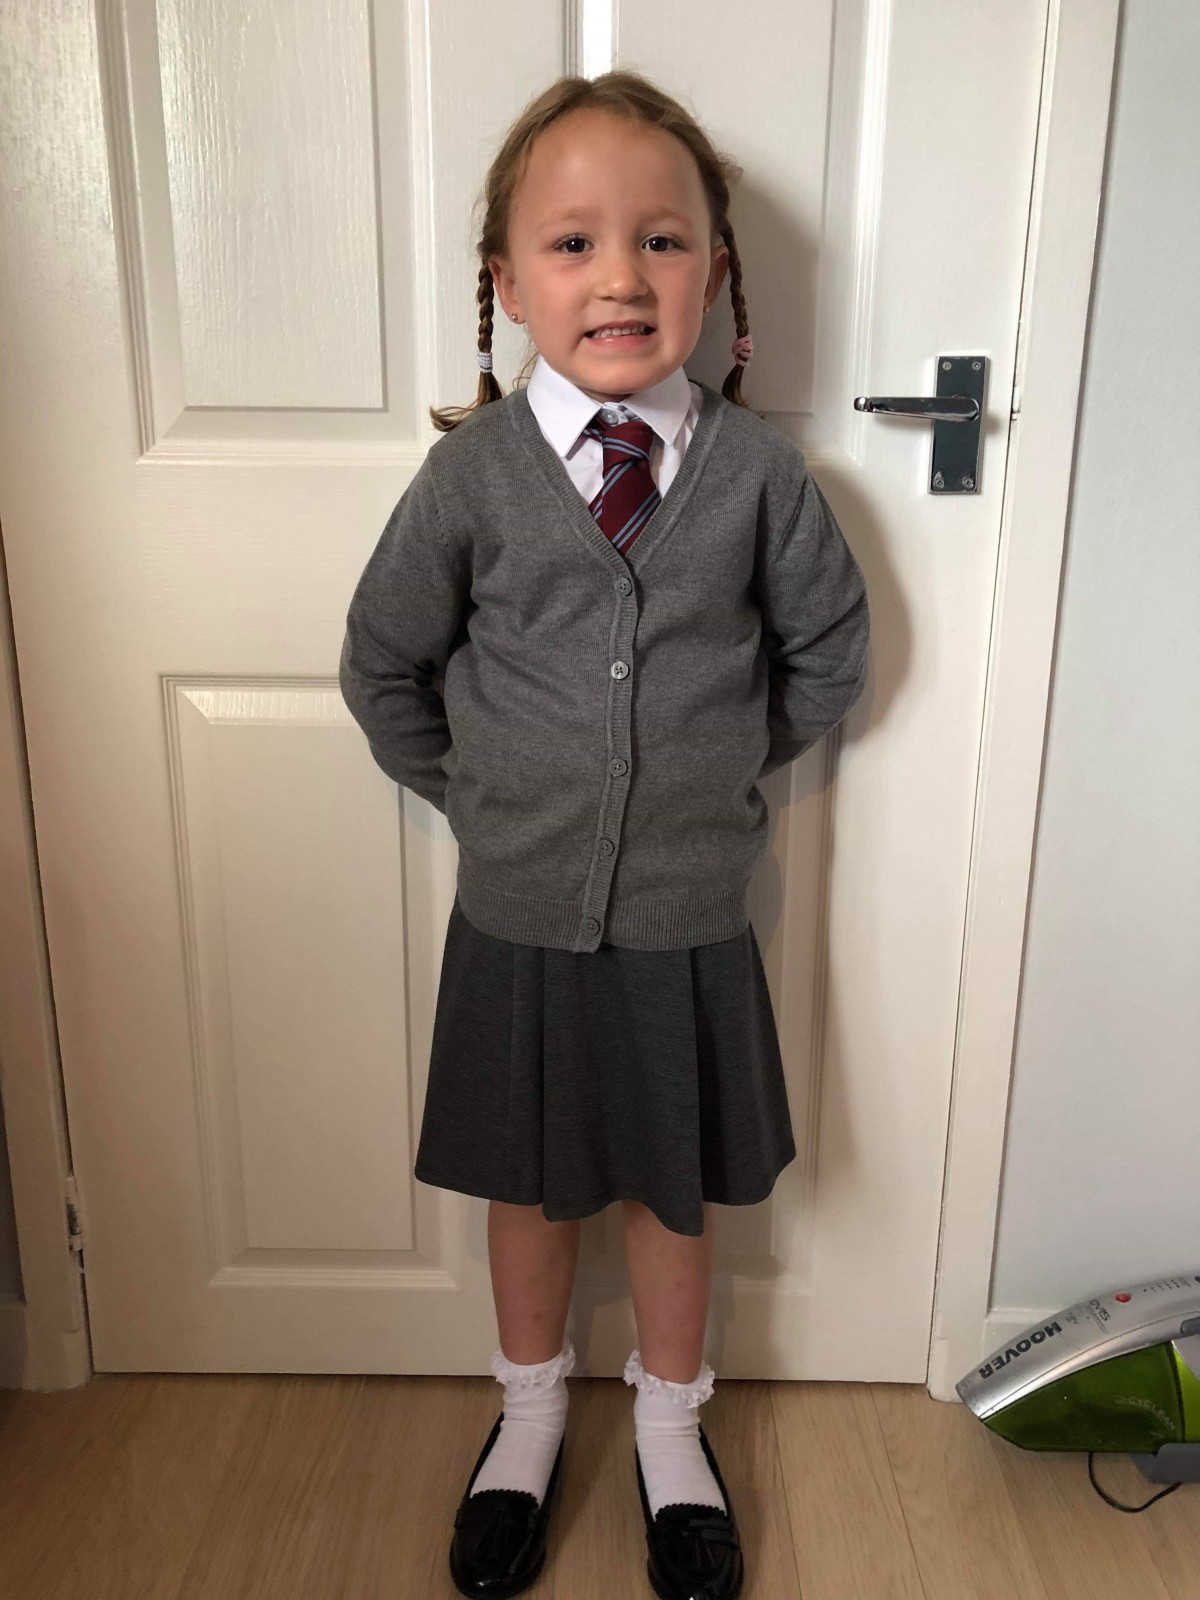 Mia is pigtails & pleats ready for Goodlyburn primary - Sent in by Mum Sara